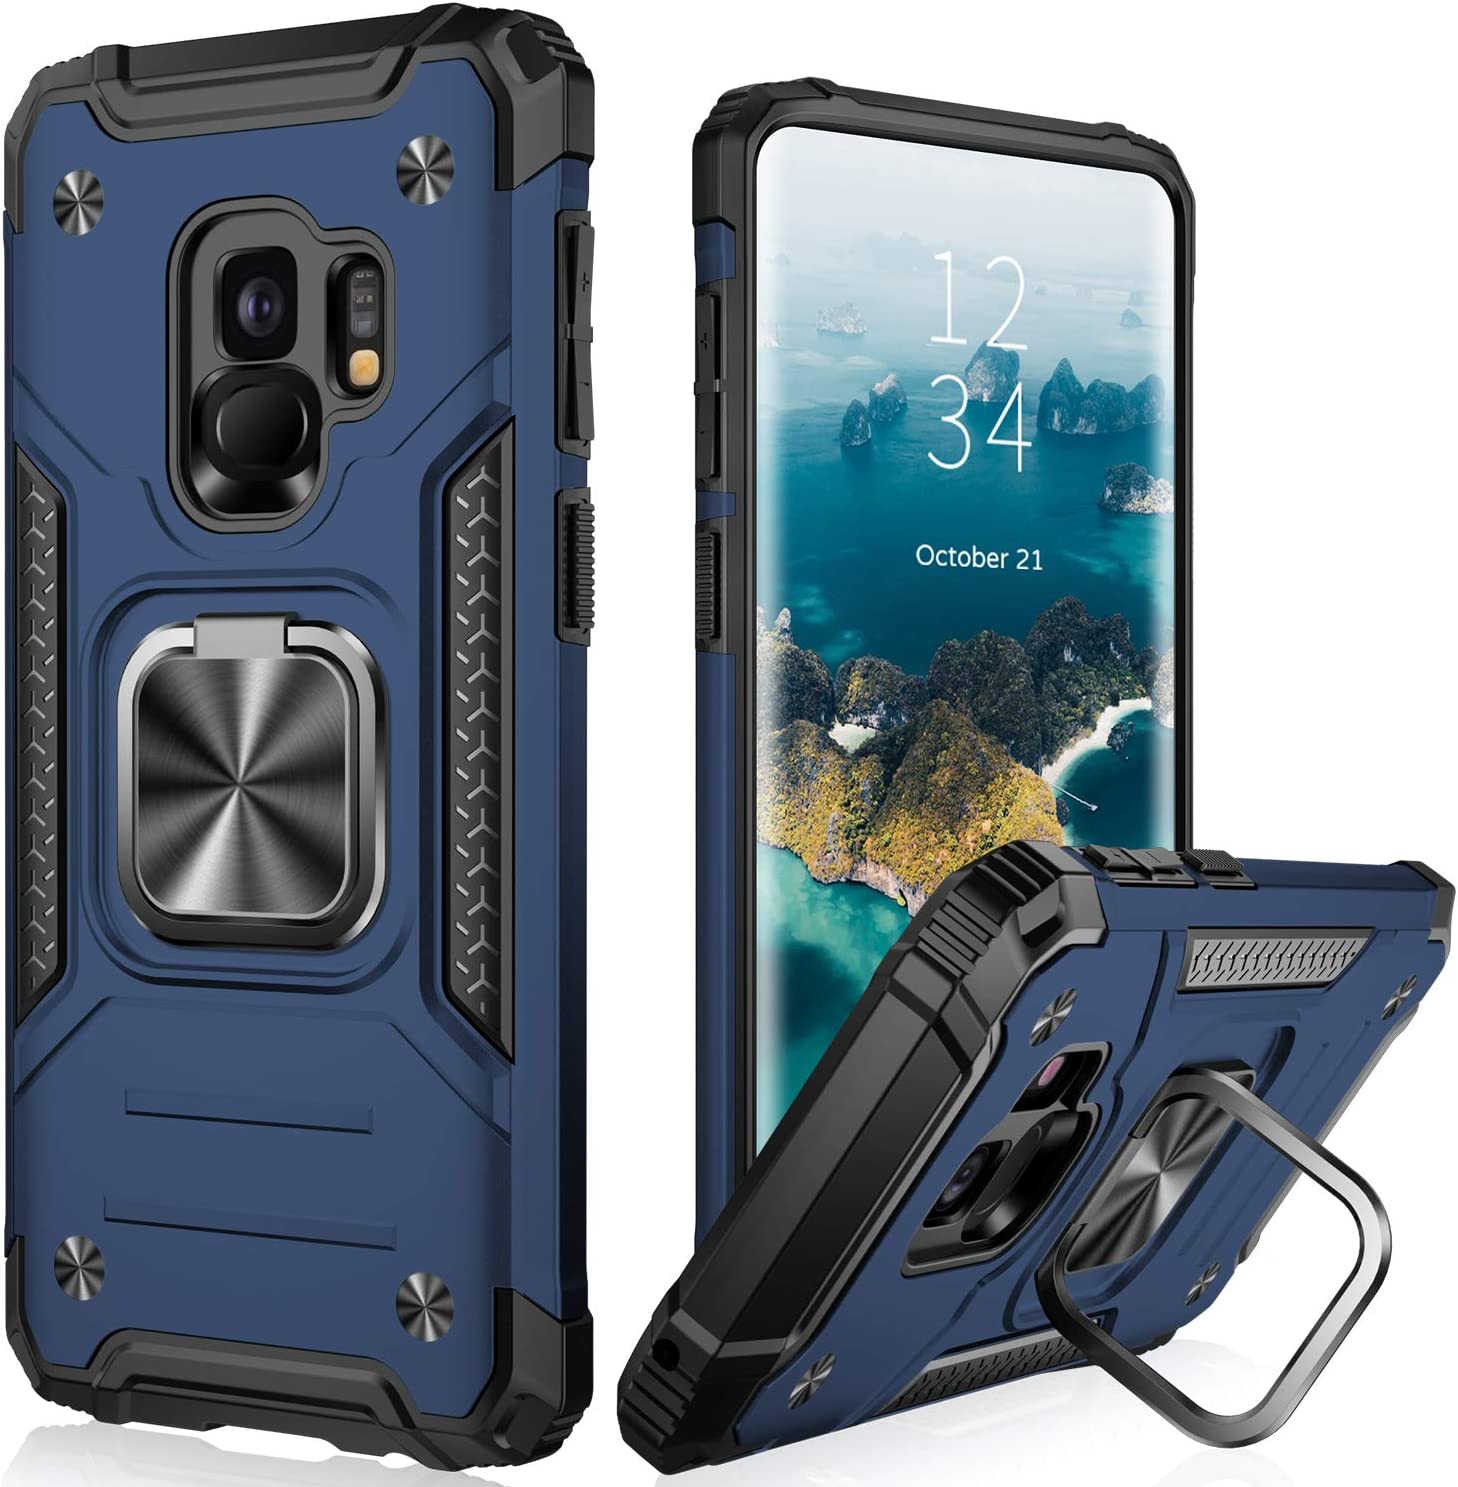 IKAZZ Galaxy S9 Case,Samsung S9 Cover Dual Layer Soft Flexible TPU and Hard PC Anti-Slip Full-Body Rugged Protective Phone Case with Magnetic Kickstand for Samsung Galaxy S9 Blue